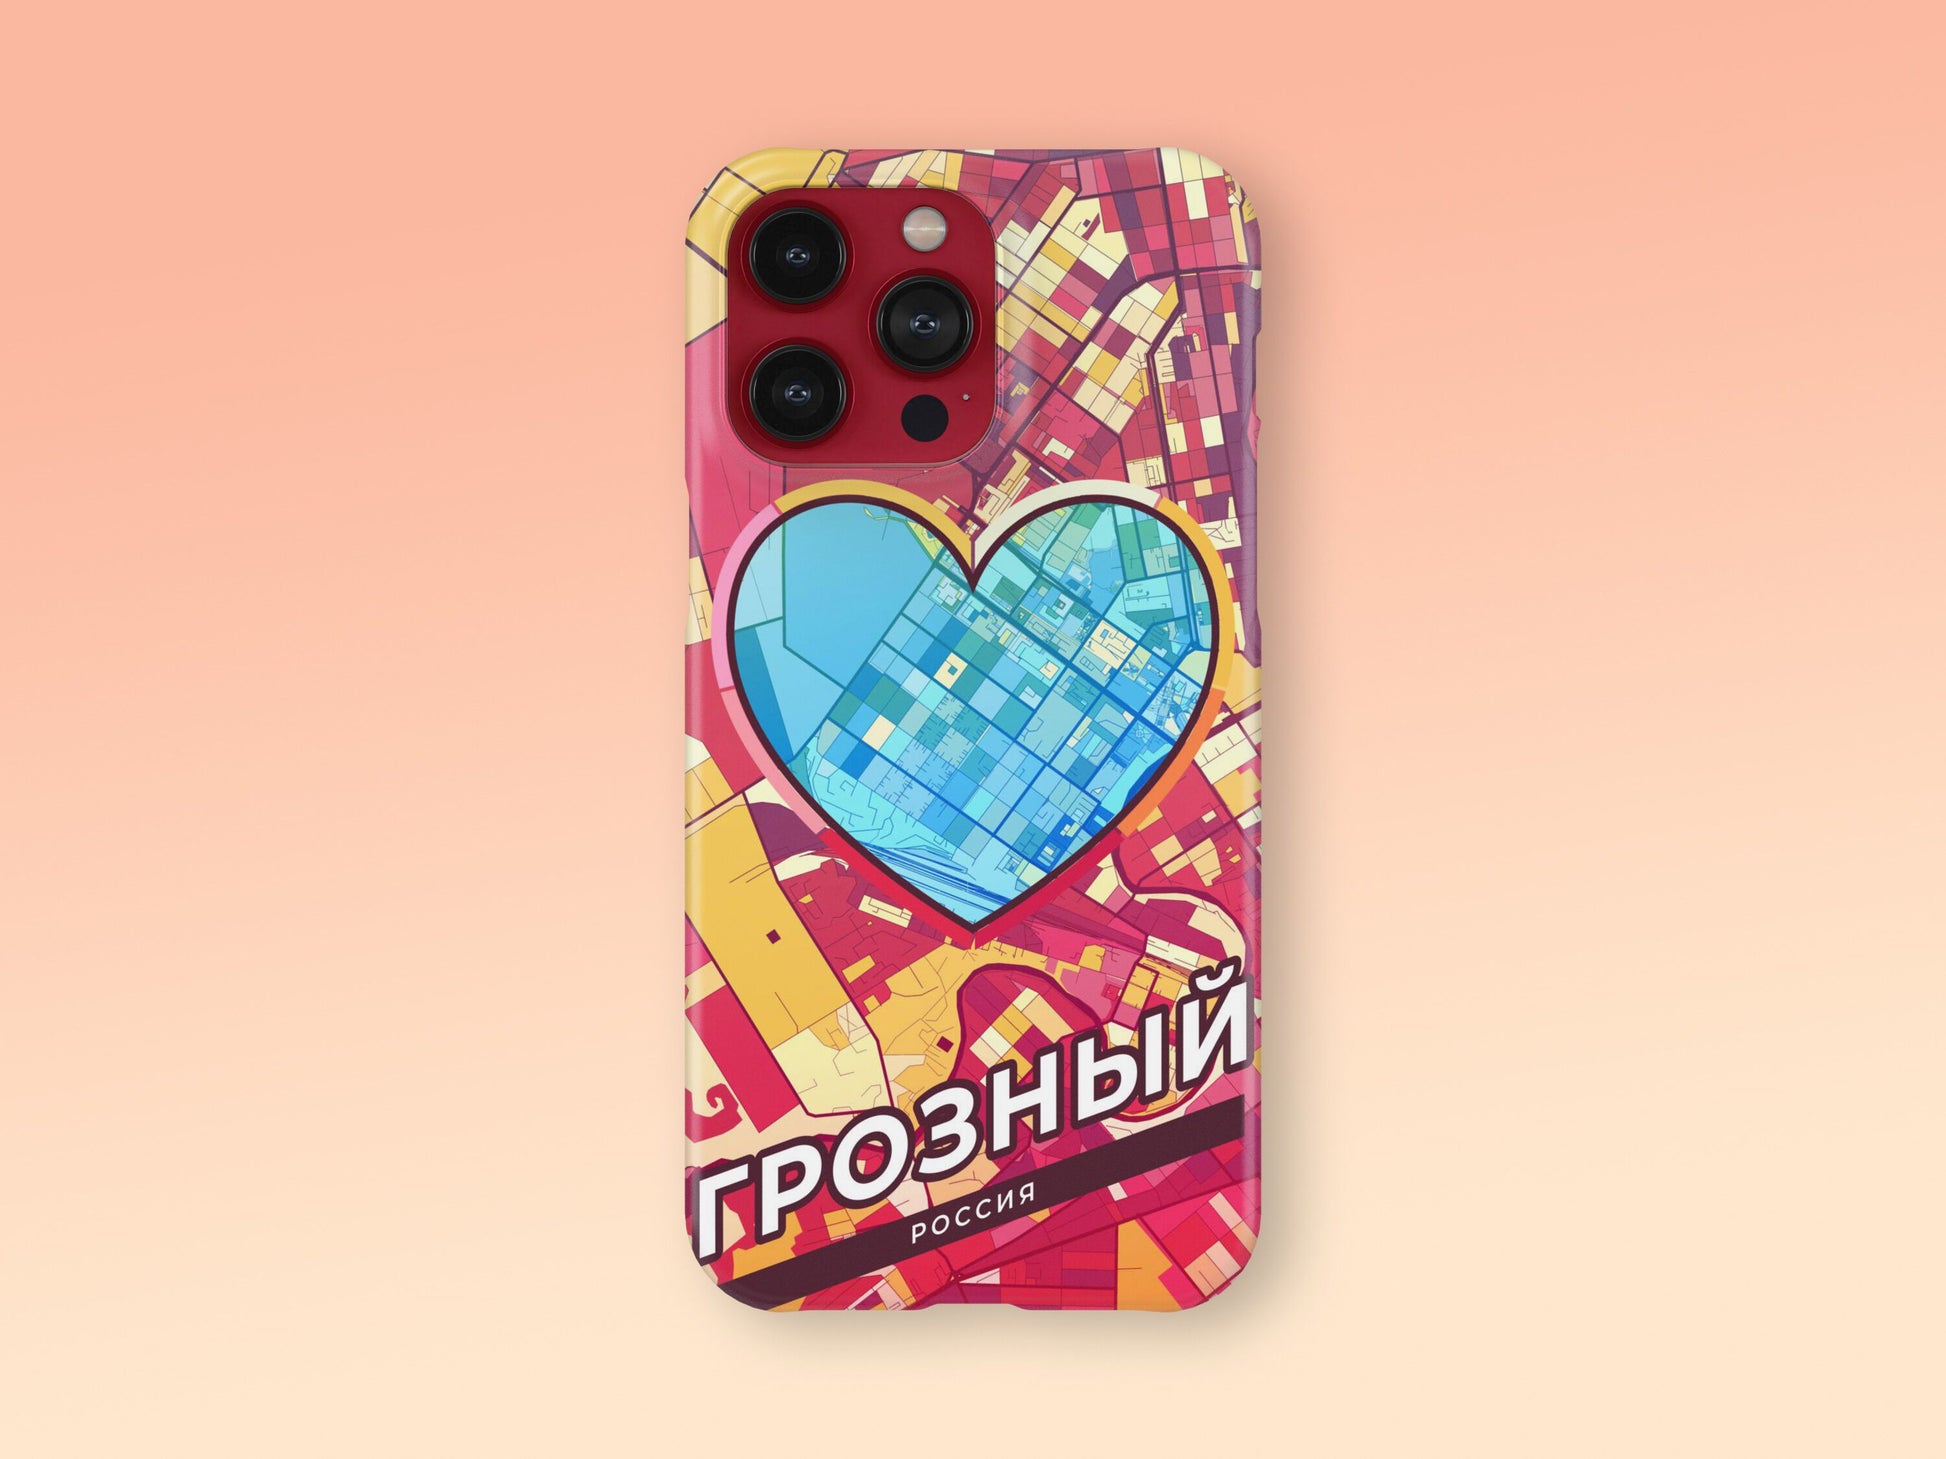 Grozny Russia slim phone case with colorful icon. Birthday, wedding or housewarming gift. Couple match cases. 2